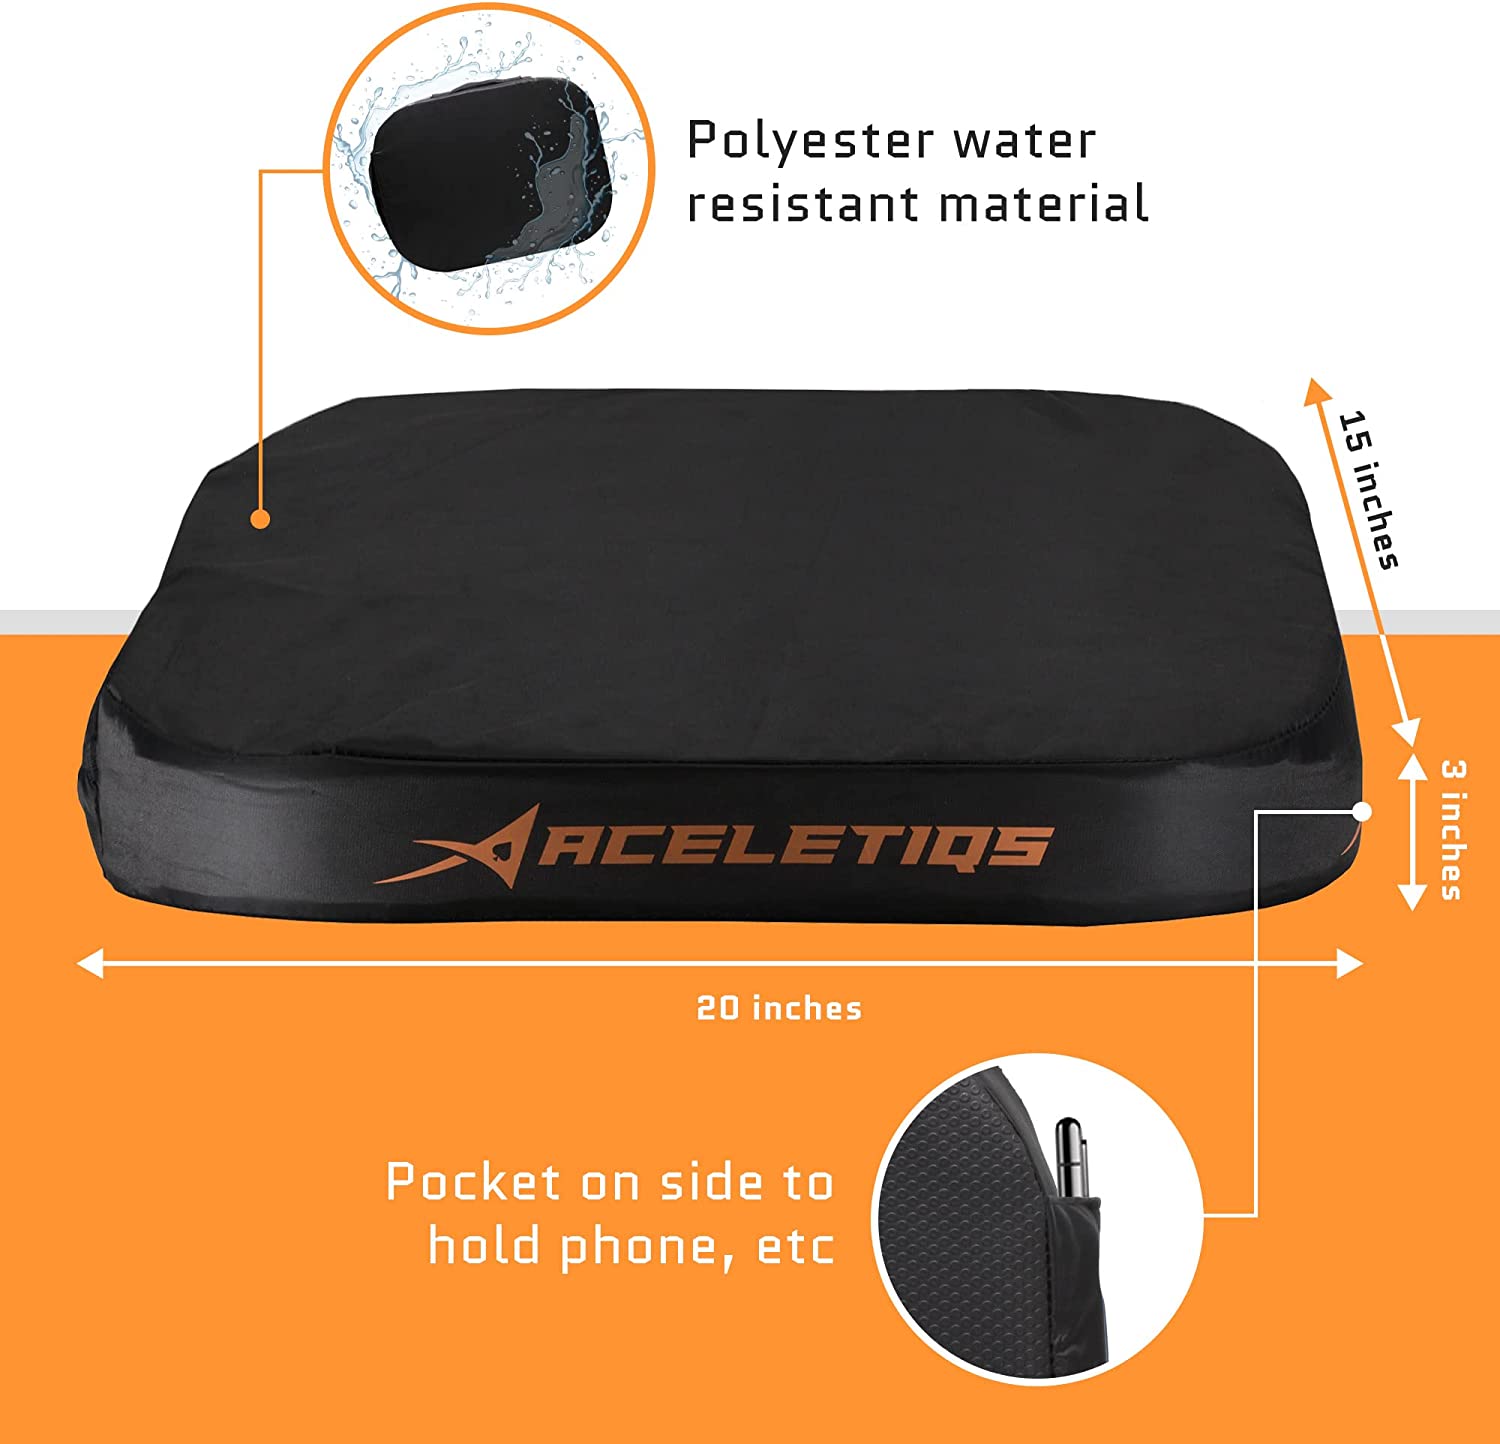 Boat Camping ACELETIQS Portable Heating Pad Stadium Seat Cushion for Bleachers Great for Office Stadium USB Battery Pack Included Park 